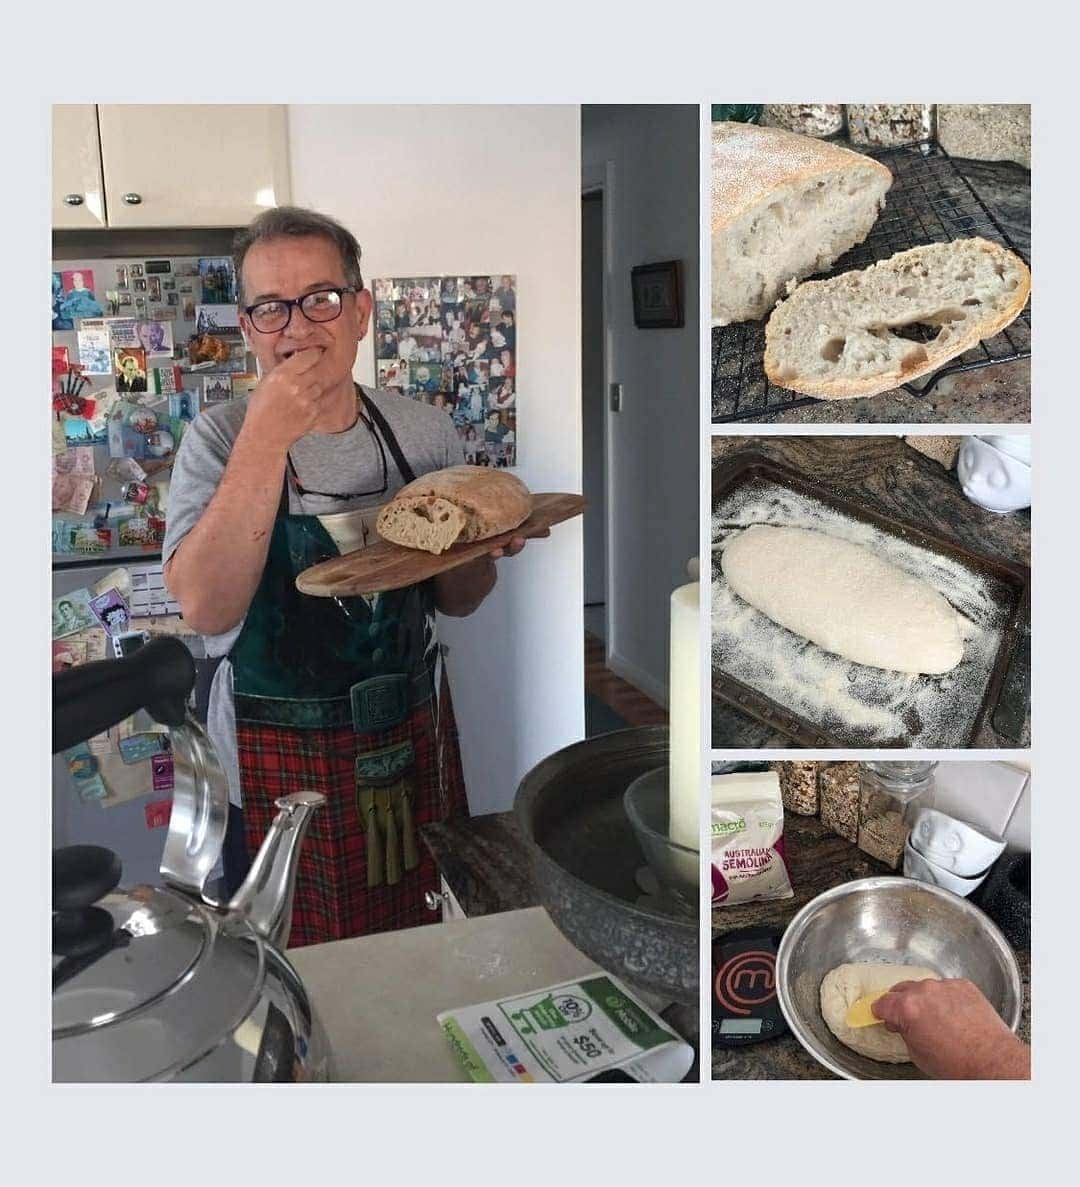 So lovely to see what artist MURAT URLALI has been up to during lockdown. Murat is Sydney based and has been baking delicious looking bread and working on some exciting new pieces! 
​
​You can view more of Murat's works via our website or please contact the gallery team. 
​
​
​ ​